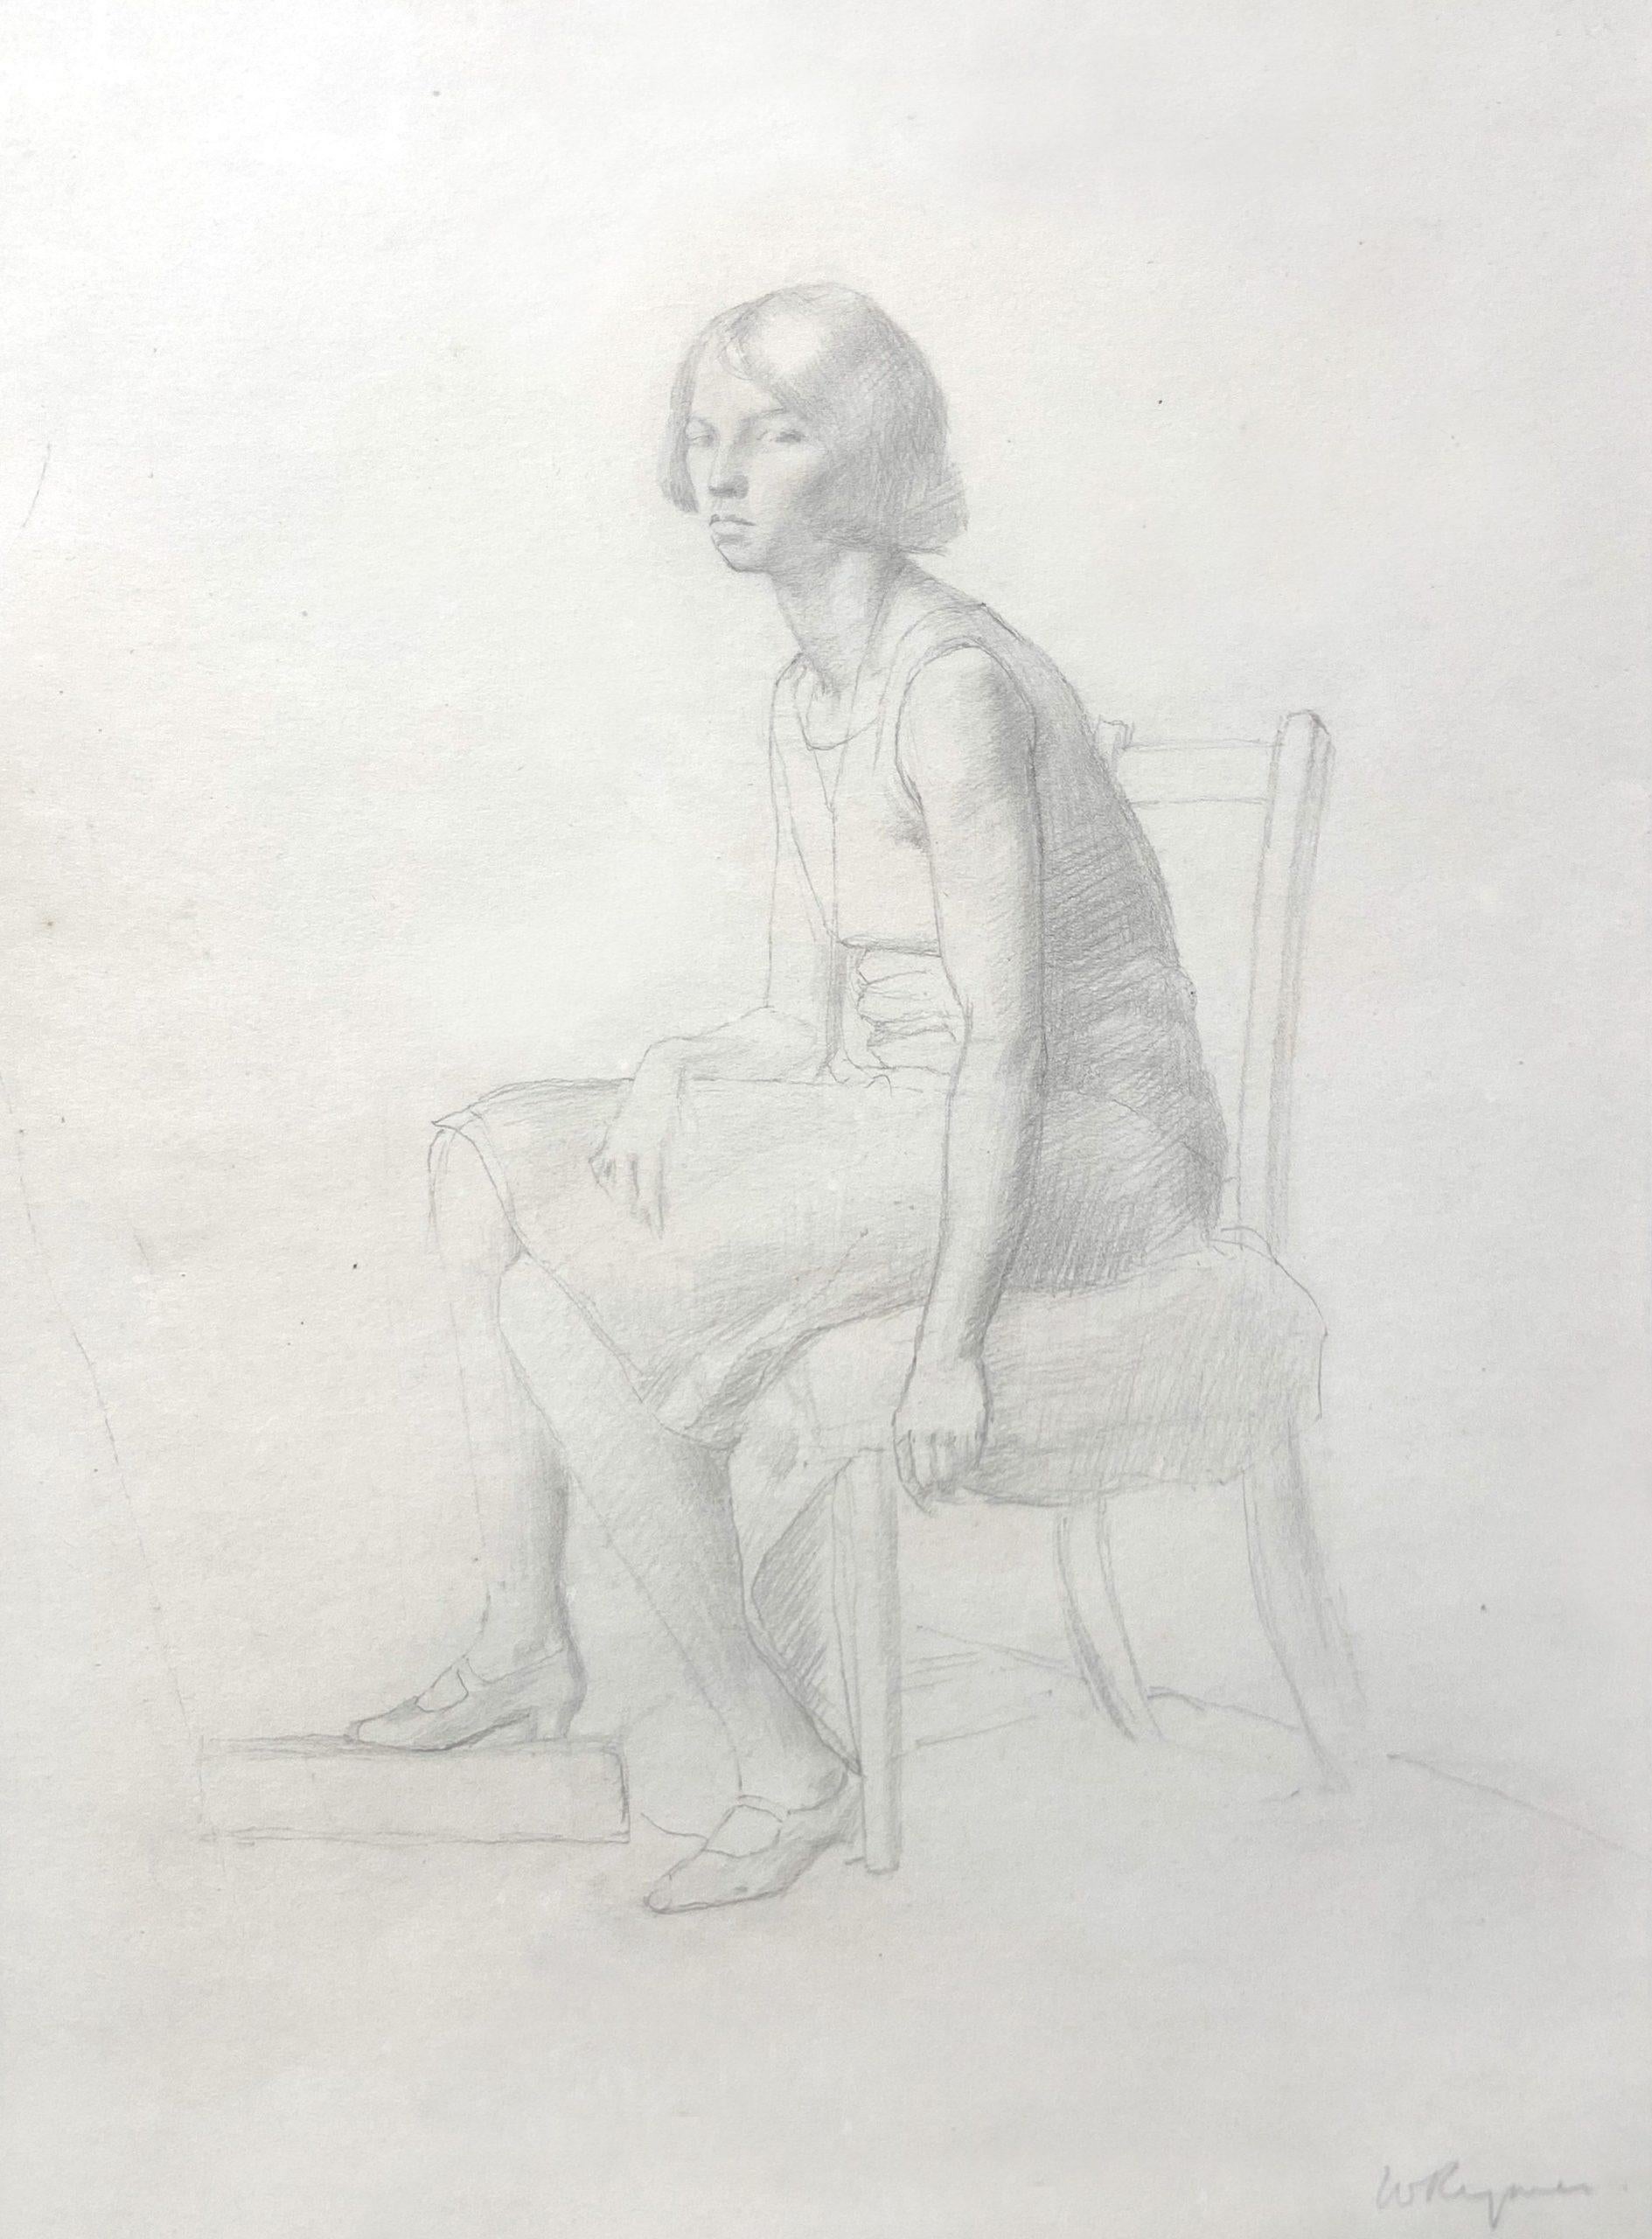 Study of a Woman, Graphite Sketch, 20th Century British Artist, Signed